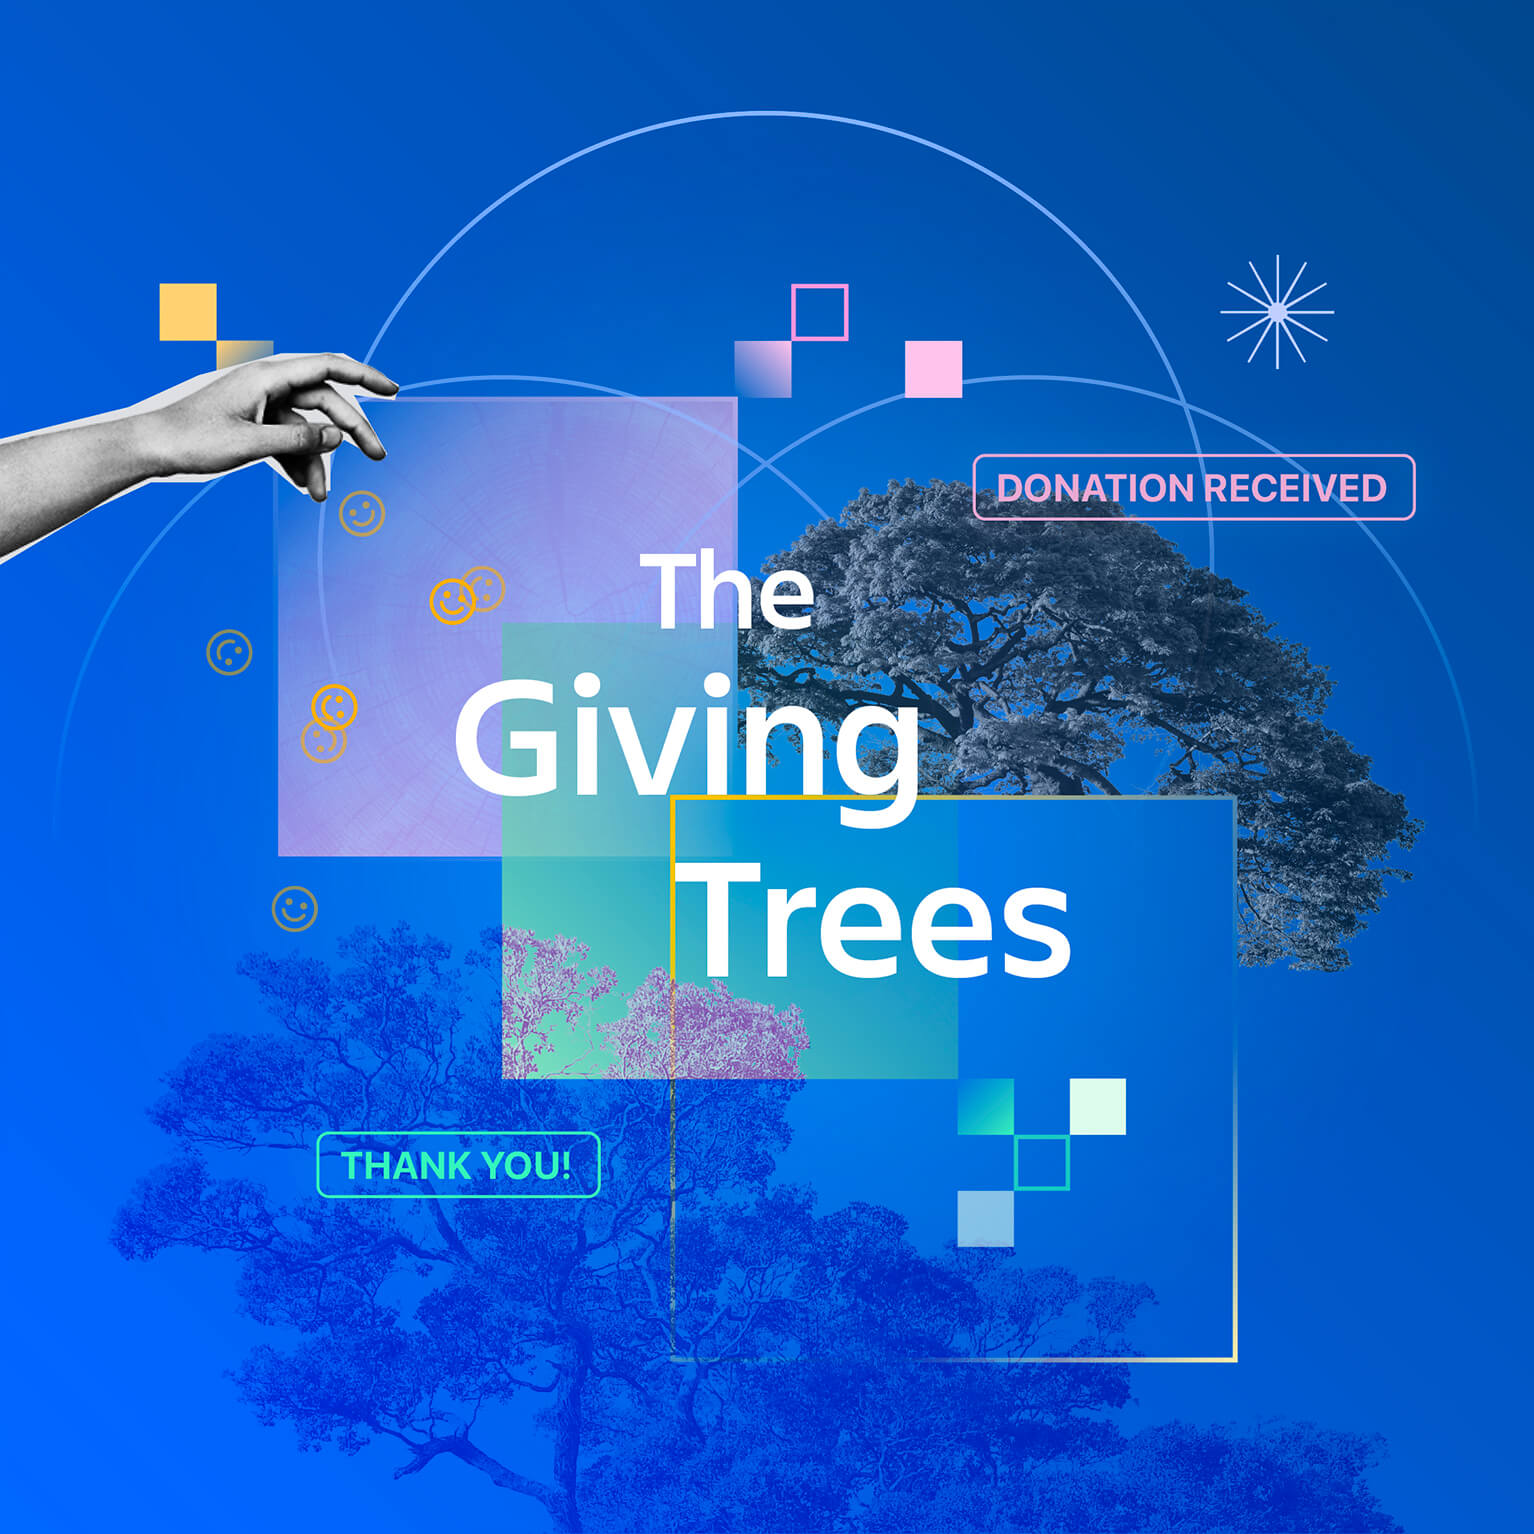 The Giving Trees illustration